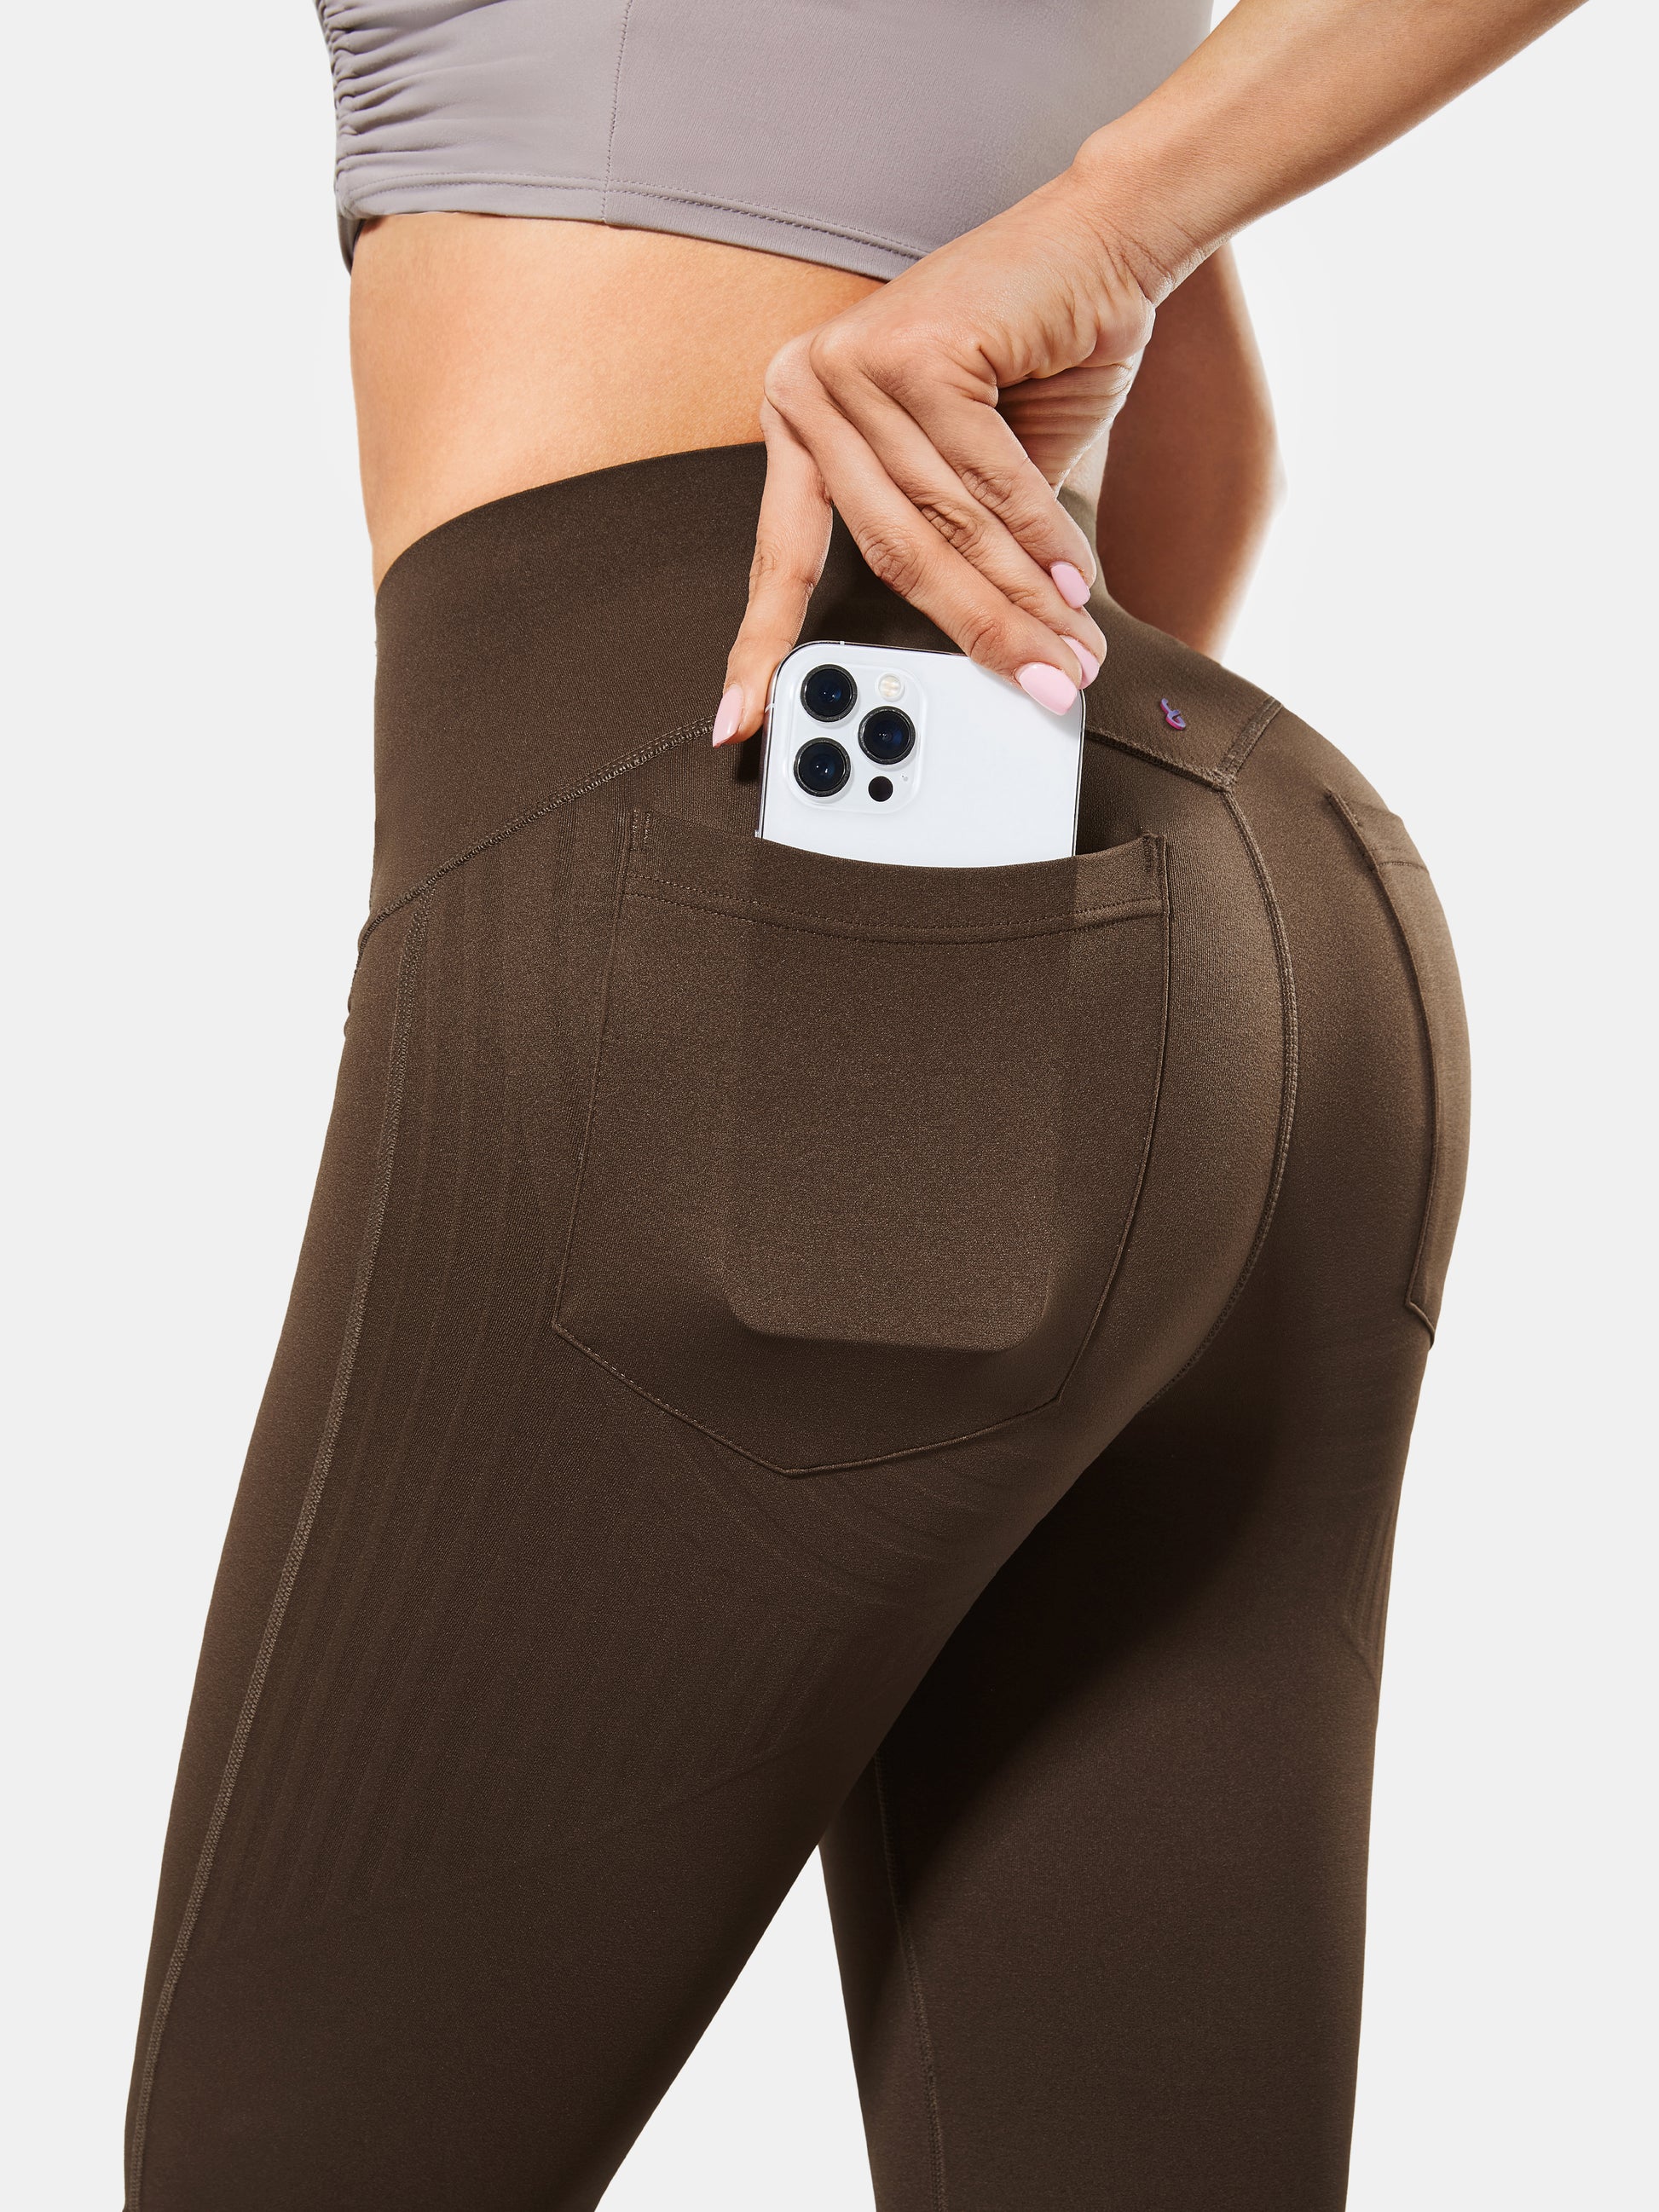 Flare Leggings for Women with Pockets Yoga Pants with Tummy